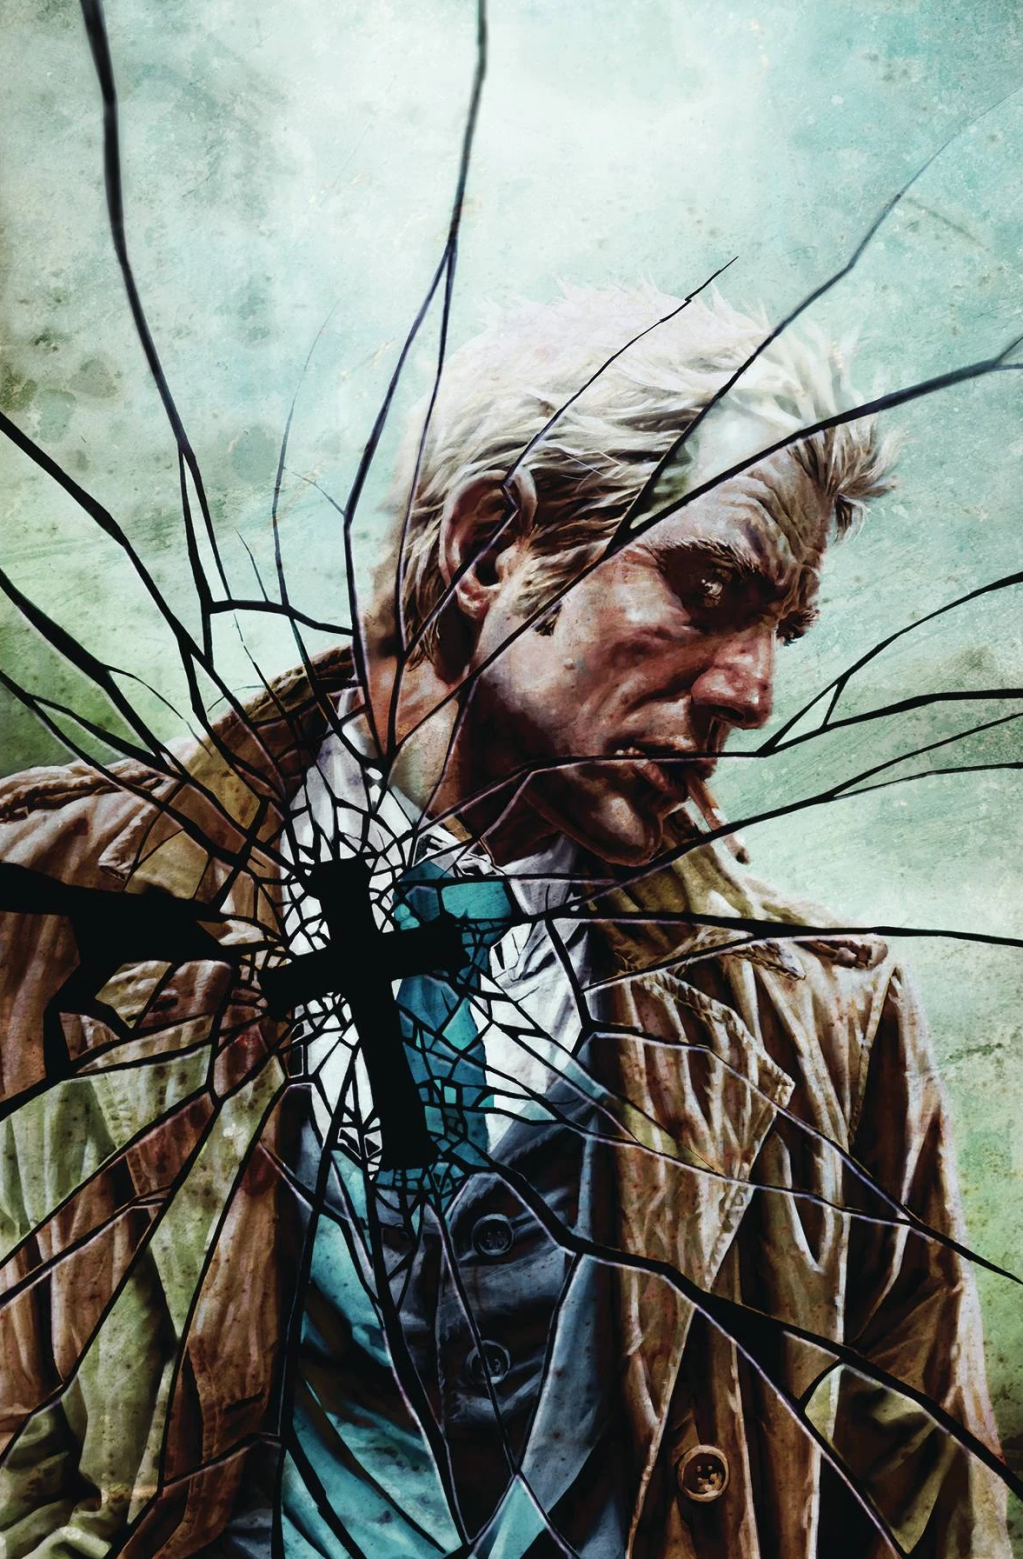 John Constantine comes face-to-face with God's wrath on Lee Bermejo's cover to Hellblazer Vol. 1 #248 "The Roots of Coincidence, Part Two" (2023), DC